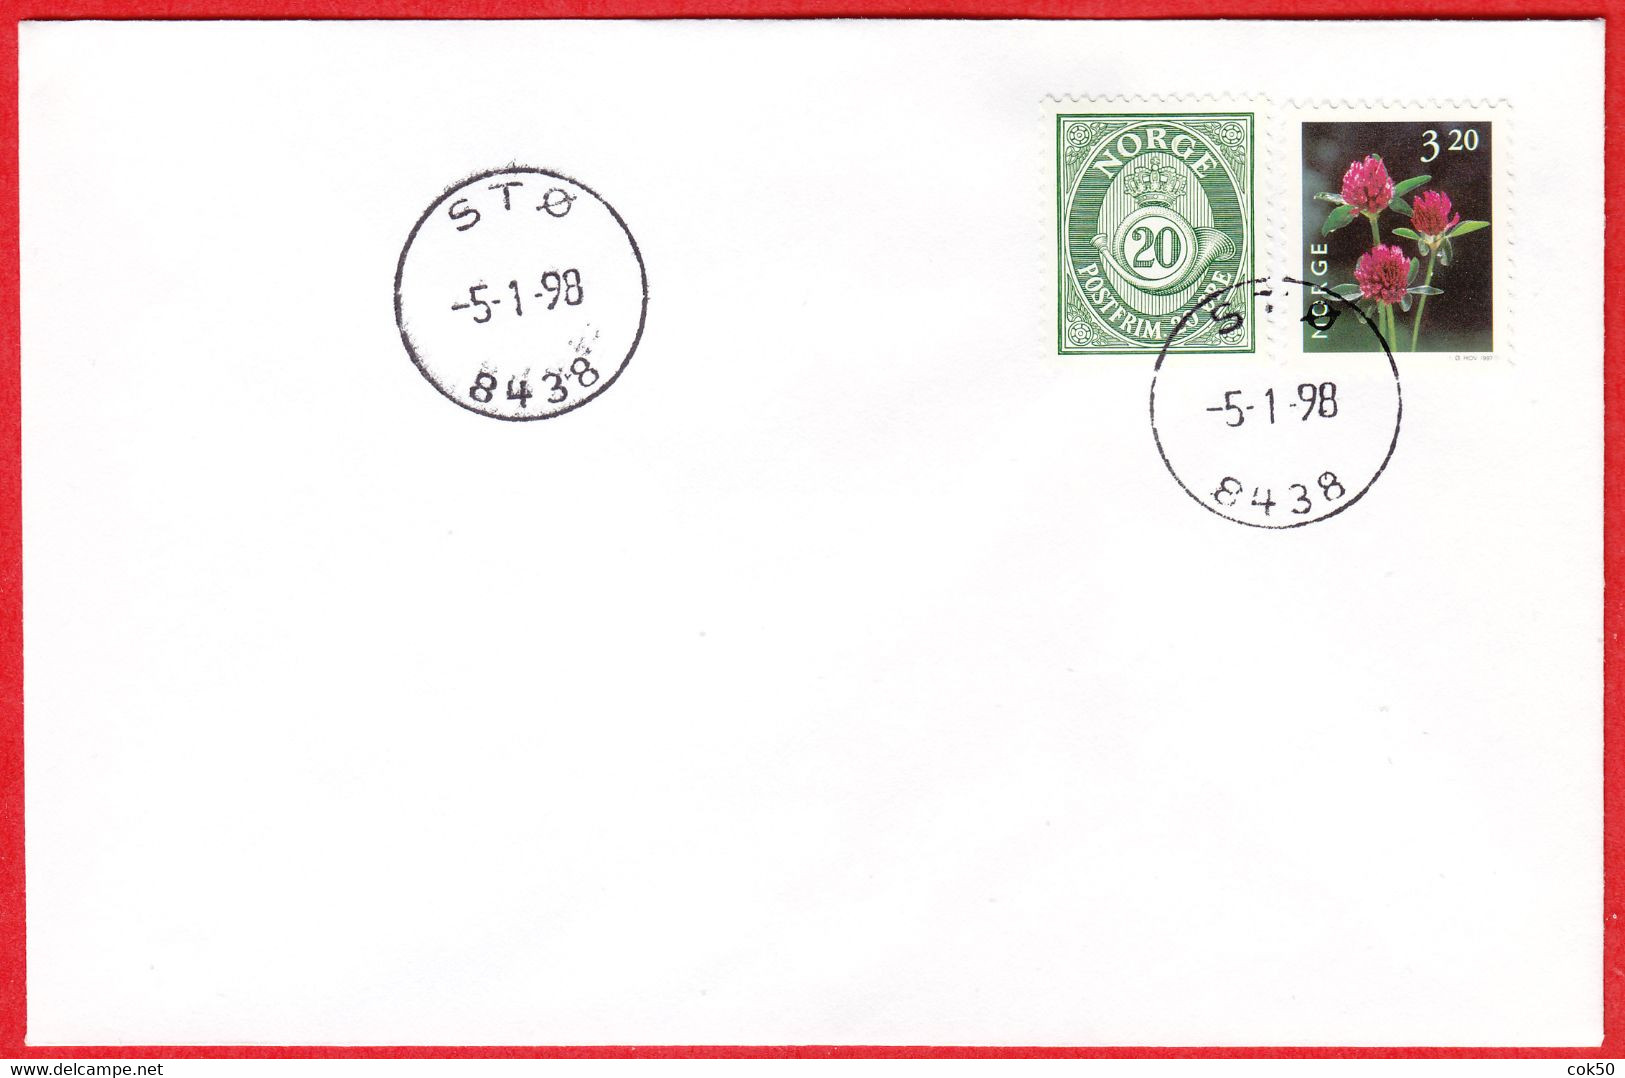 NORWAY -  8438 STØ (Nordland County) - Last Day/postoffice Closed On 1998.01.05 - Emisiones Locales